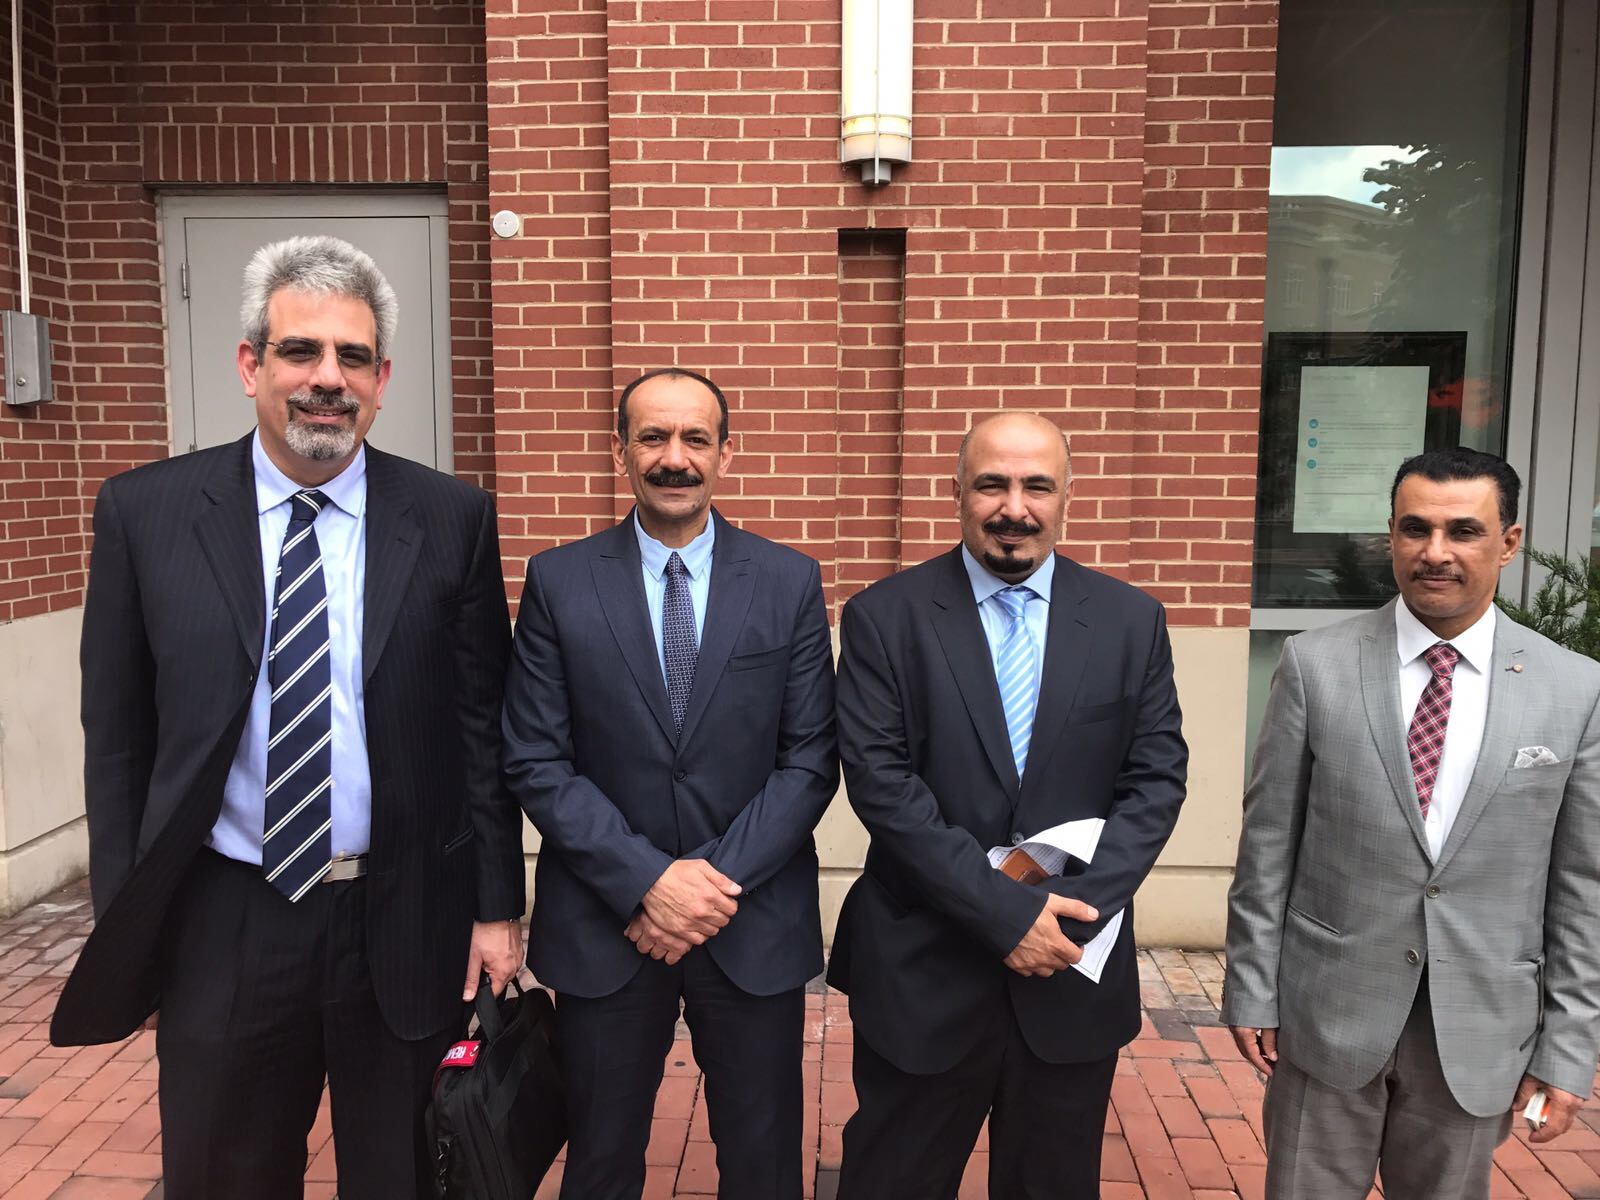 A Kuwaiti delegation from DGCA heads by Emad Al-Jluwi and TSA's officials